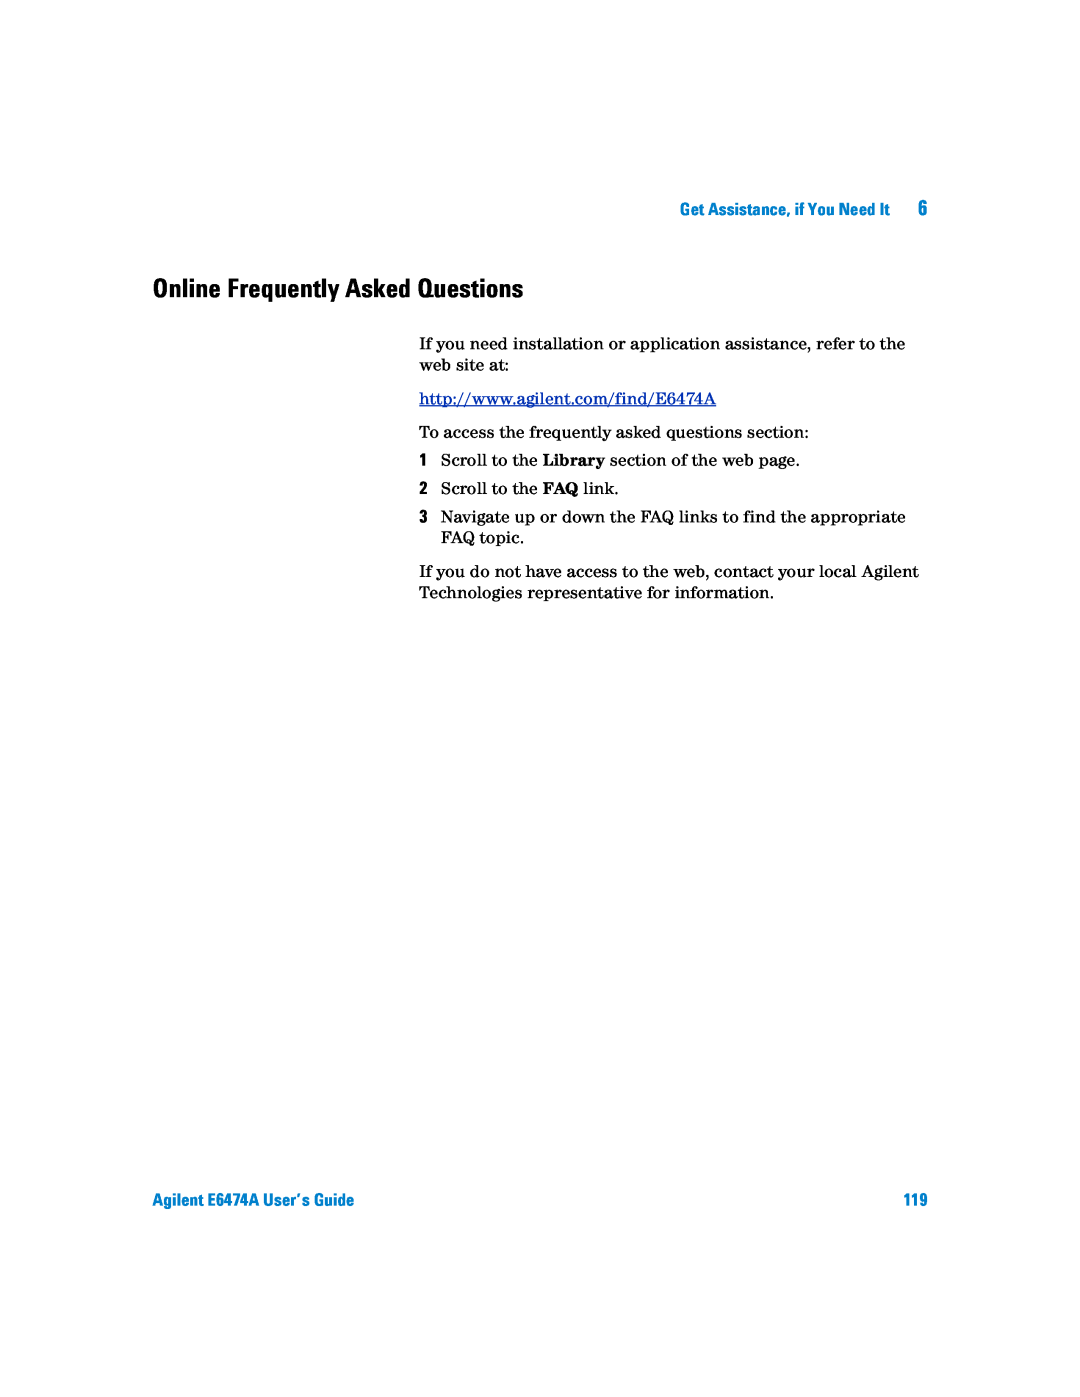 Agilent Technologies manual Online Frequently Asked Questions, Agilent E6474A User’s Guide 